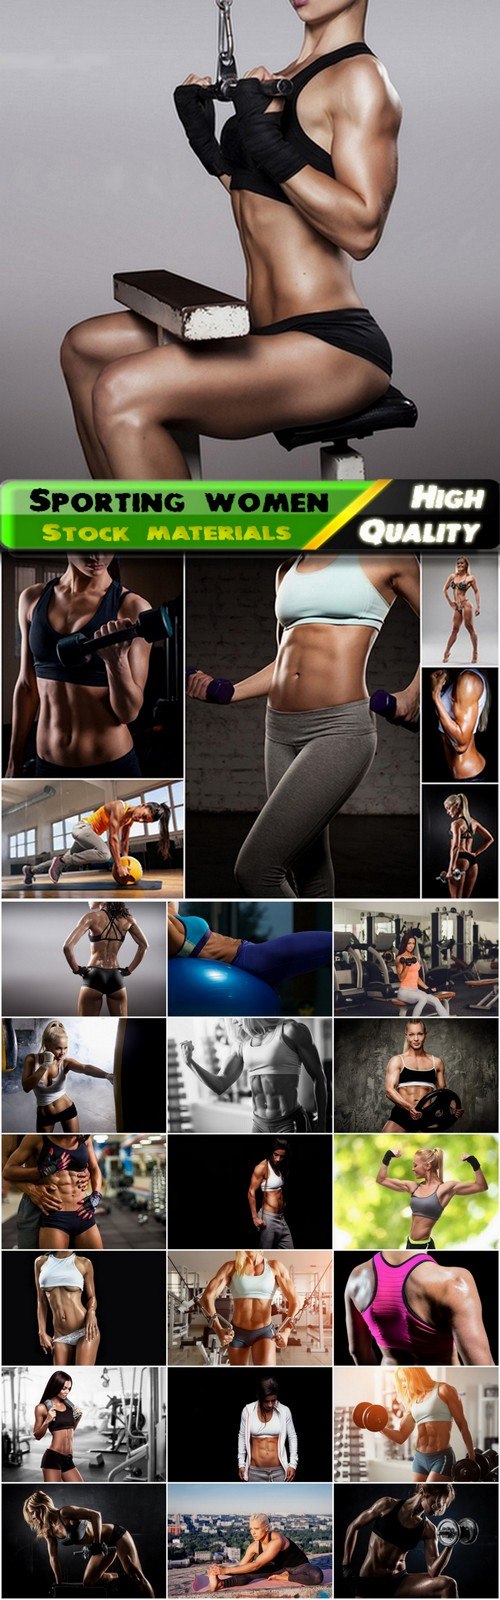 Sporting women with muscles in the gym - 25 HQ Jpg